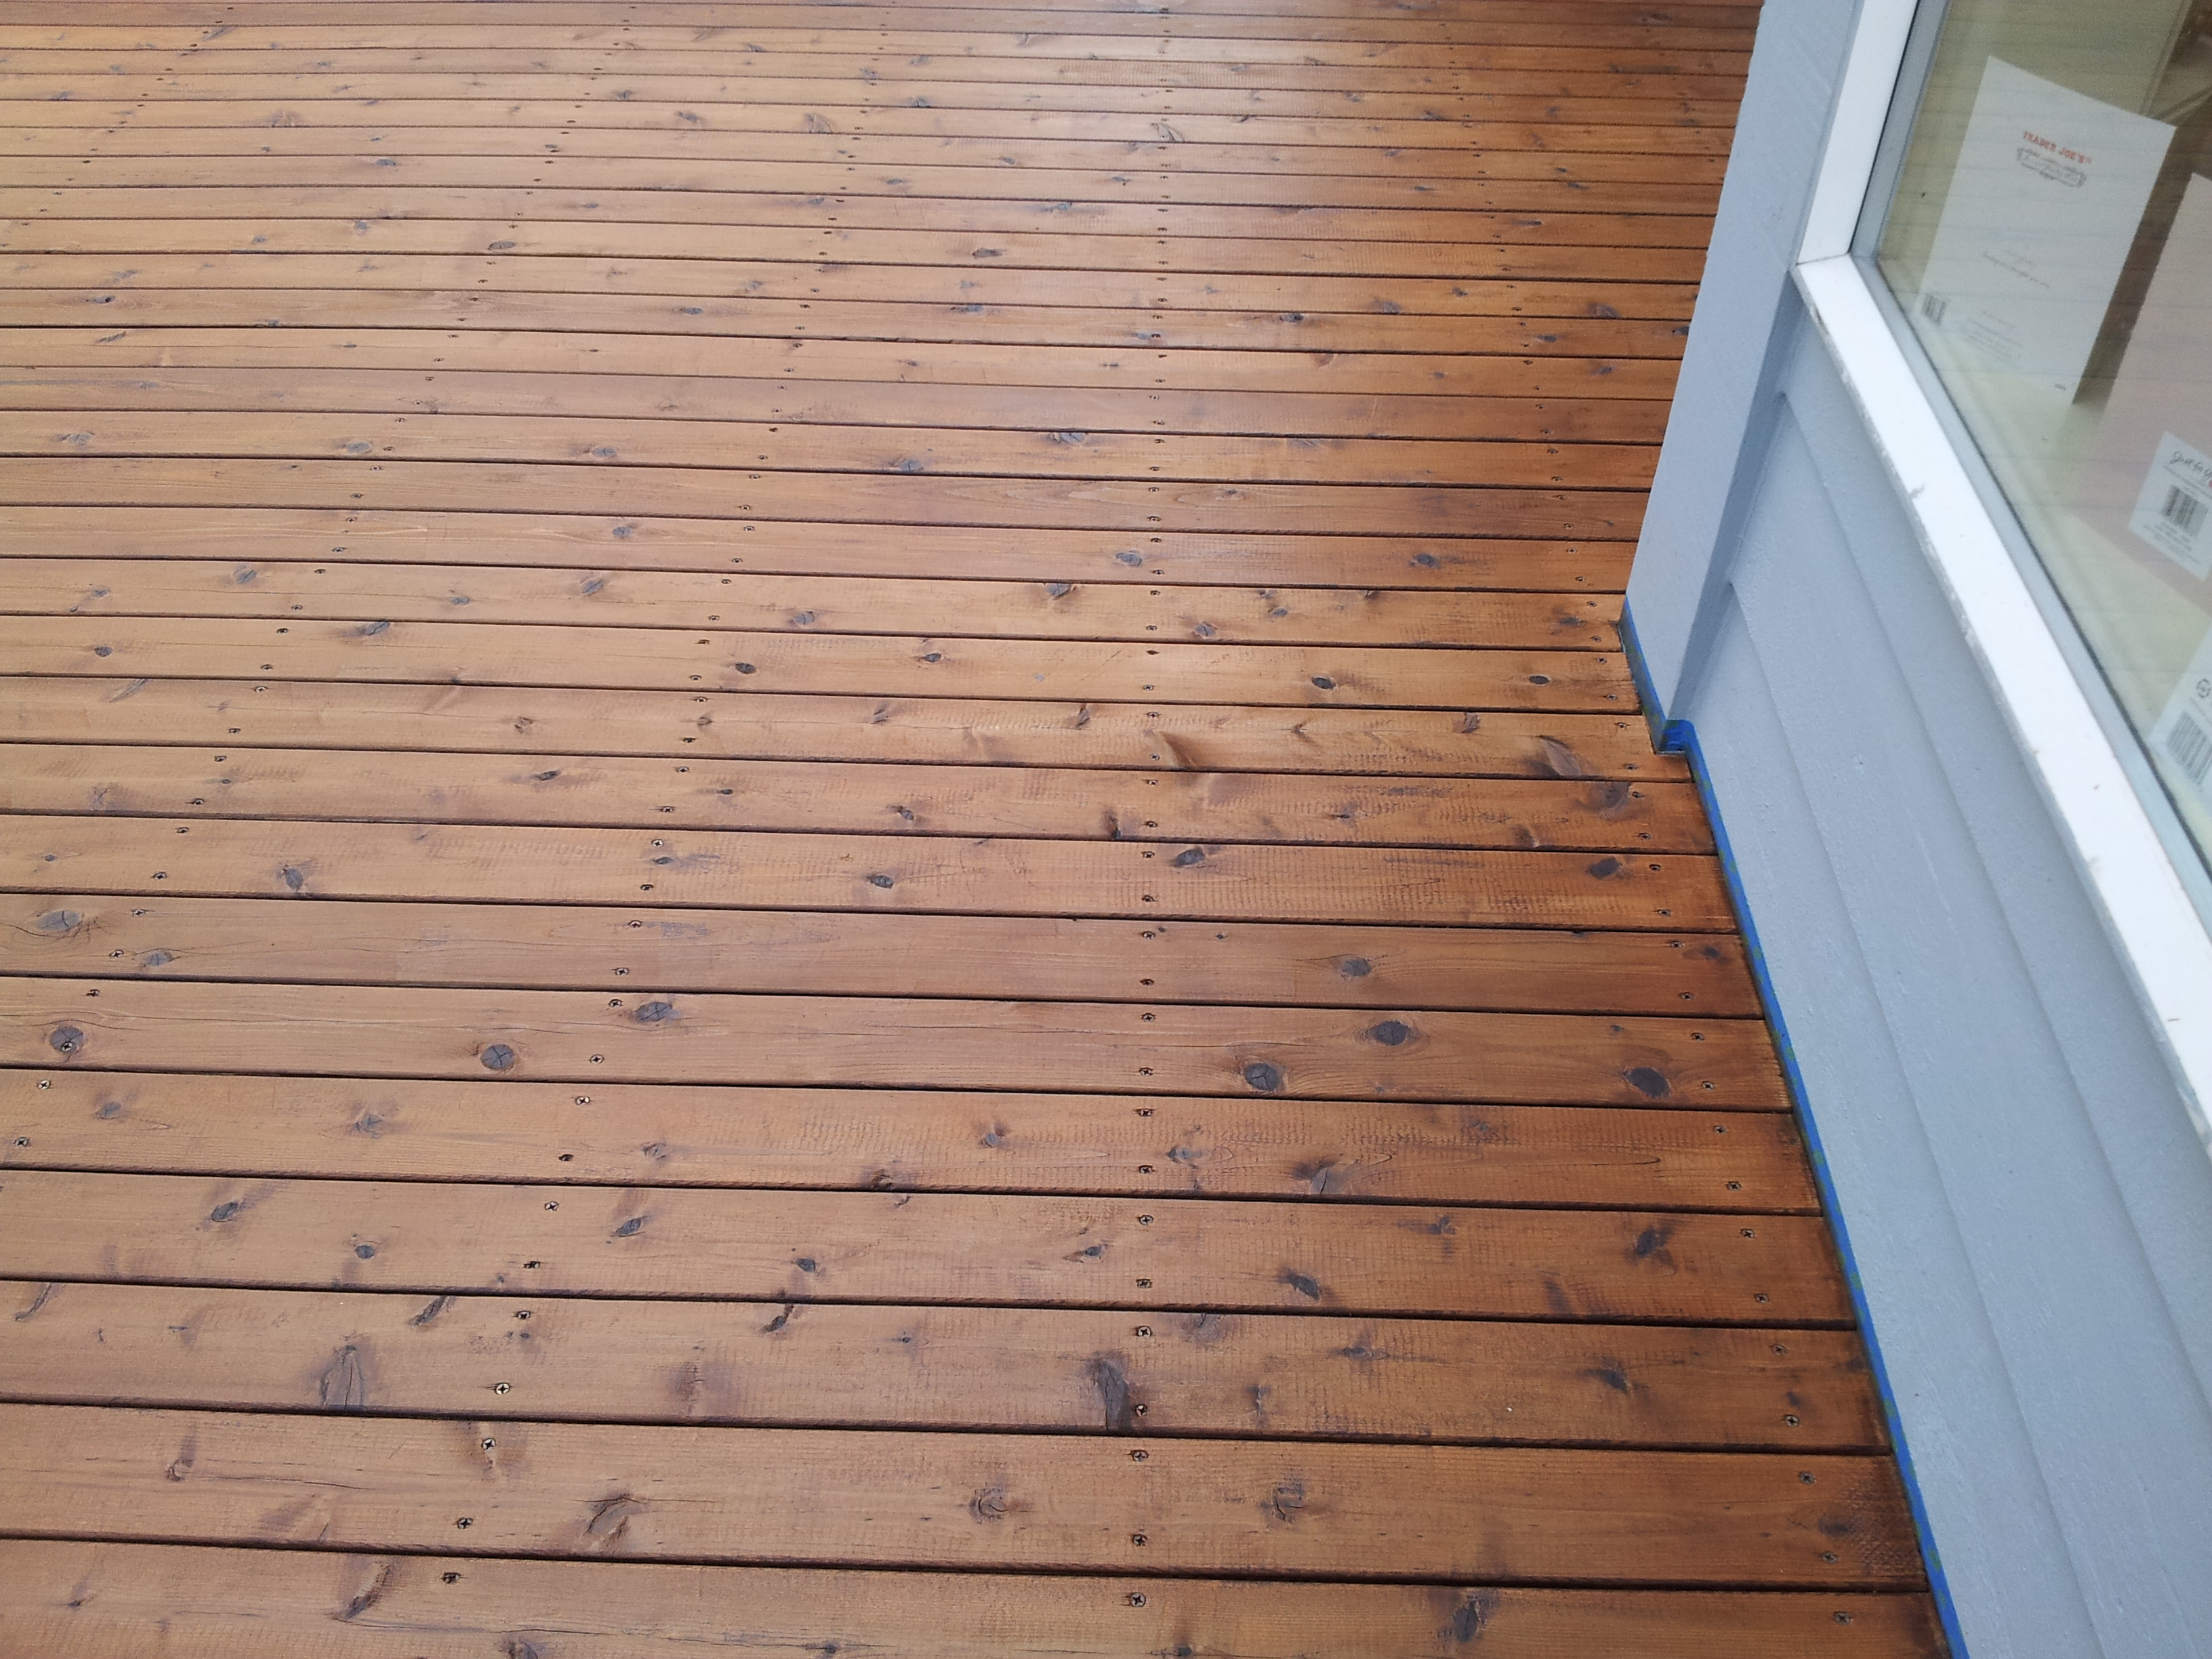 Oil Based Deck Stains 2019 Best Deck Stain Reviews Ratings regarding size 3264 X 2448